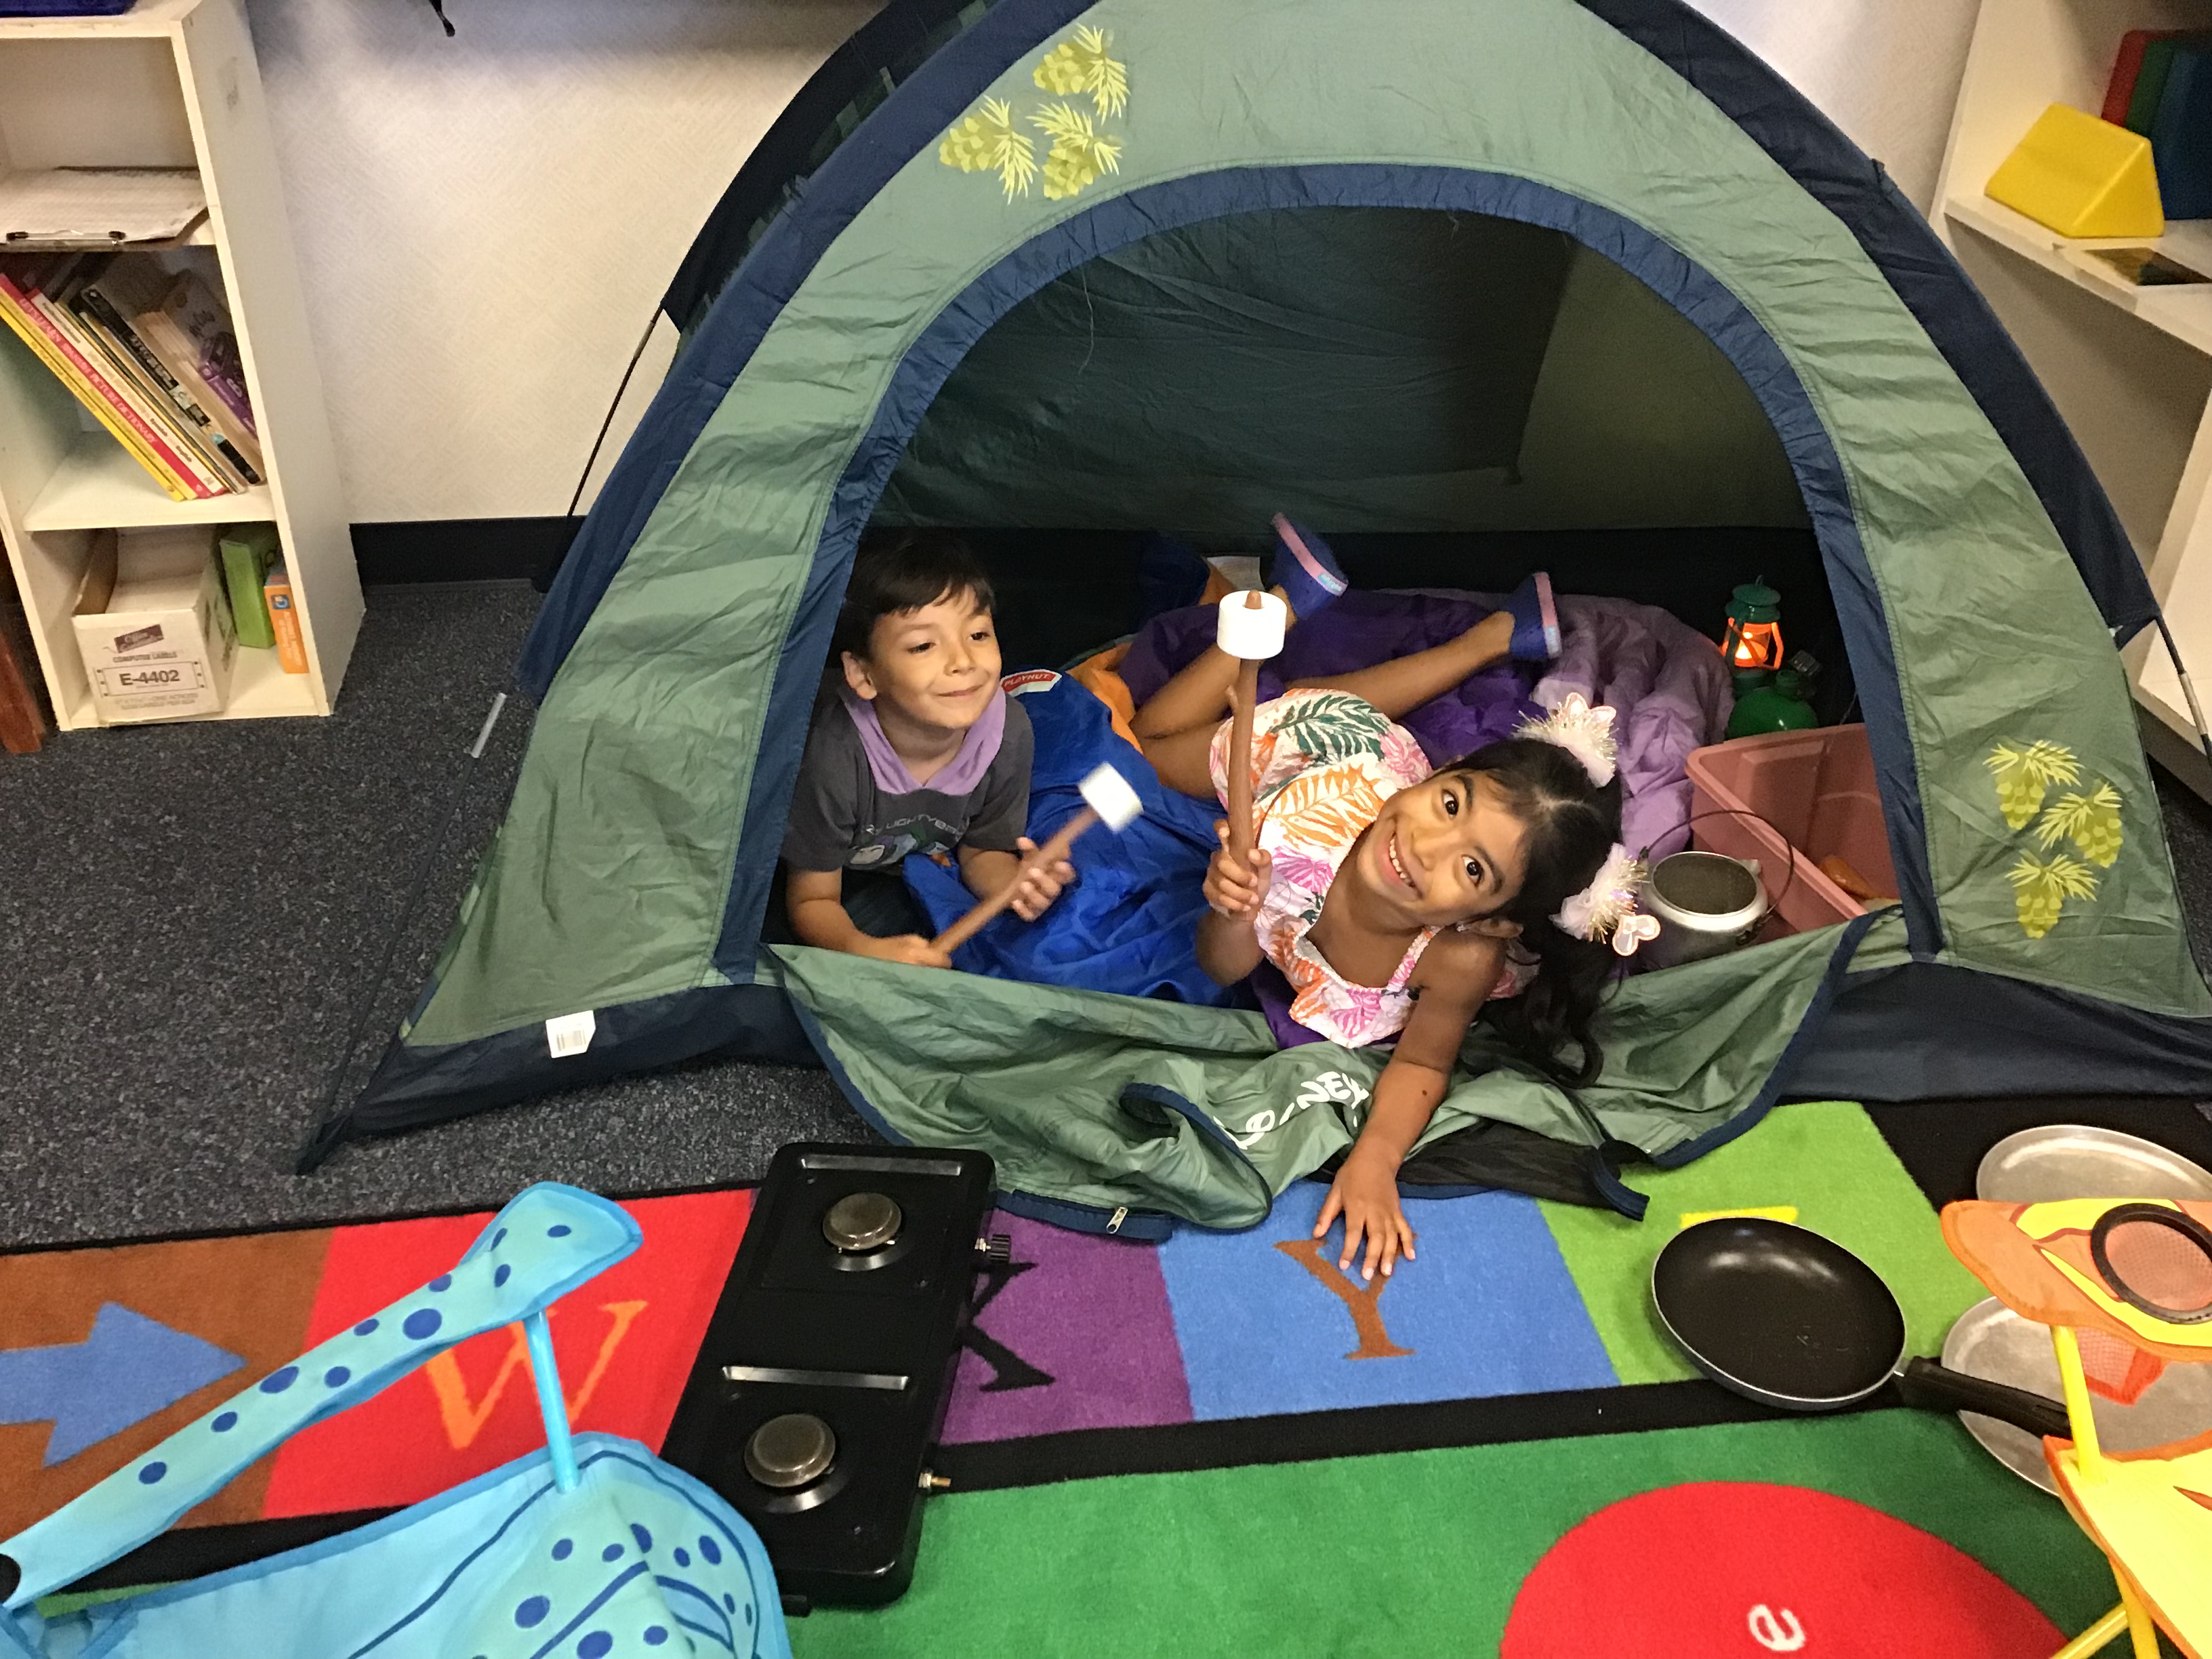 Two students playing in the tent and making smores.